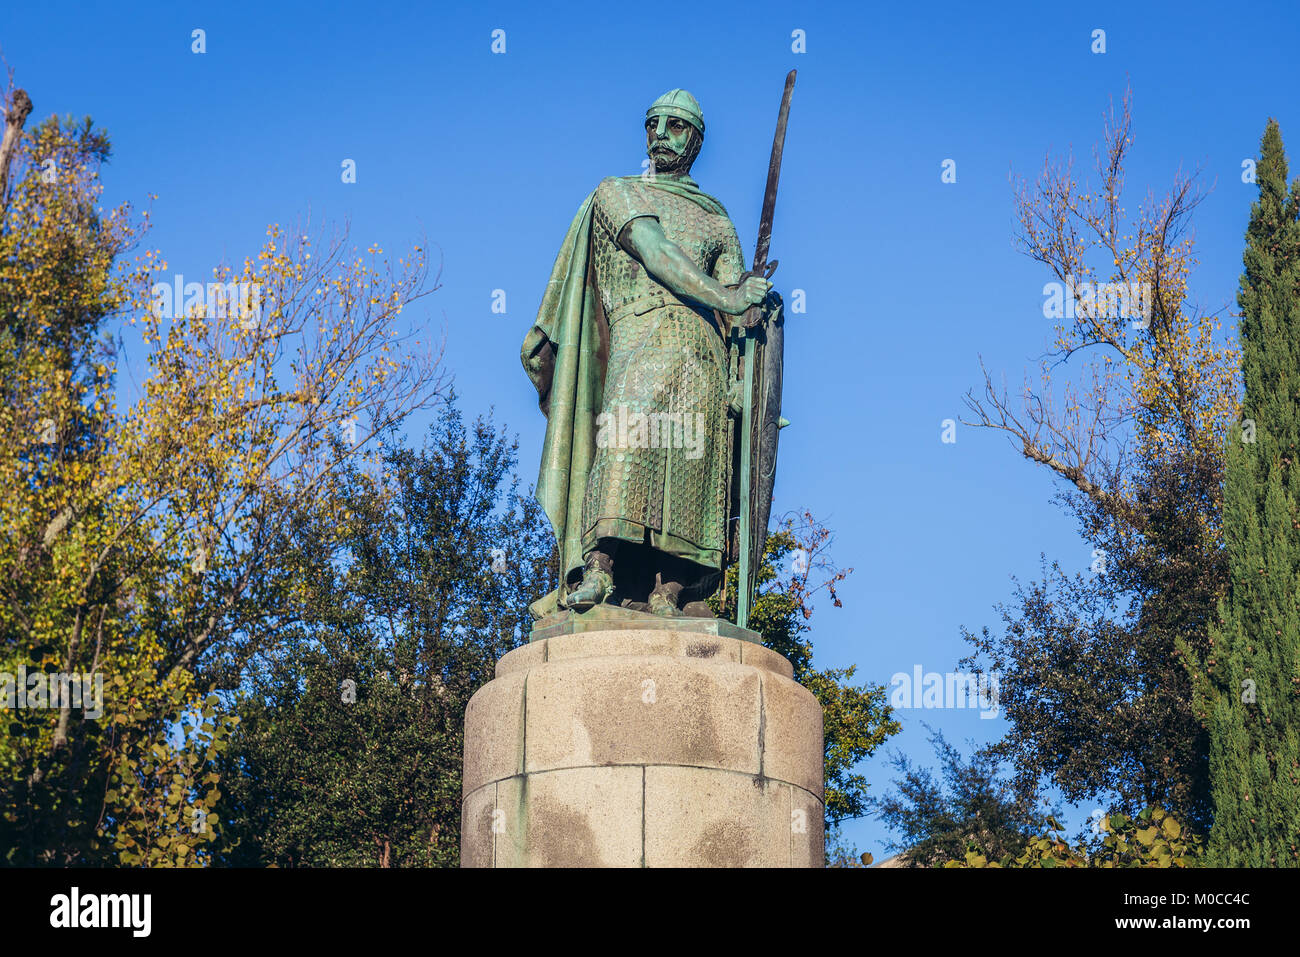 Statue of Afonso I of Portugal, known as 